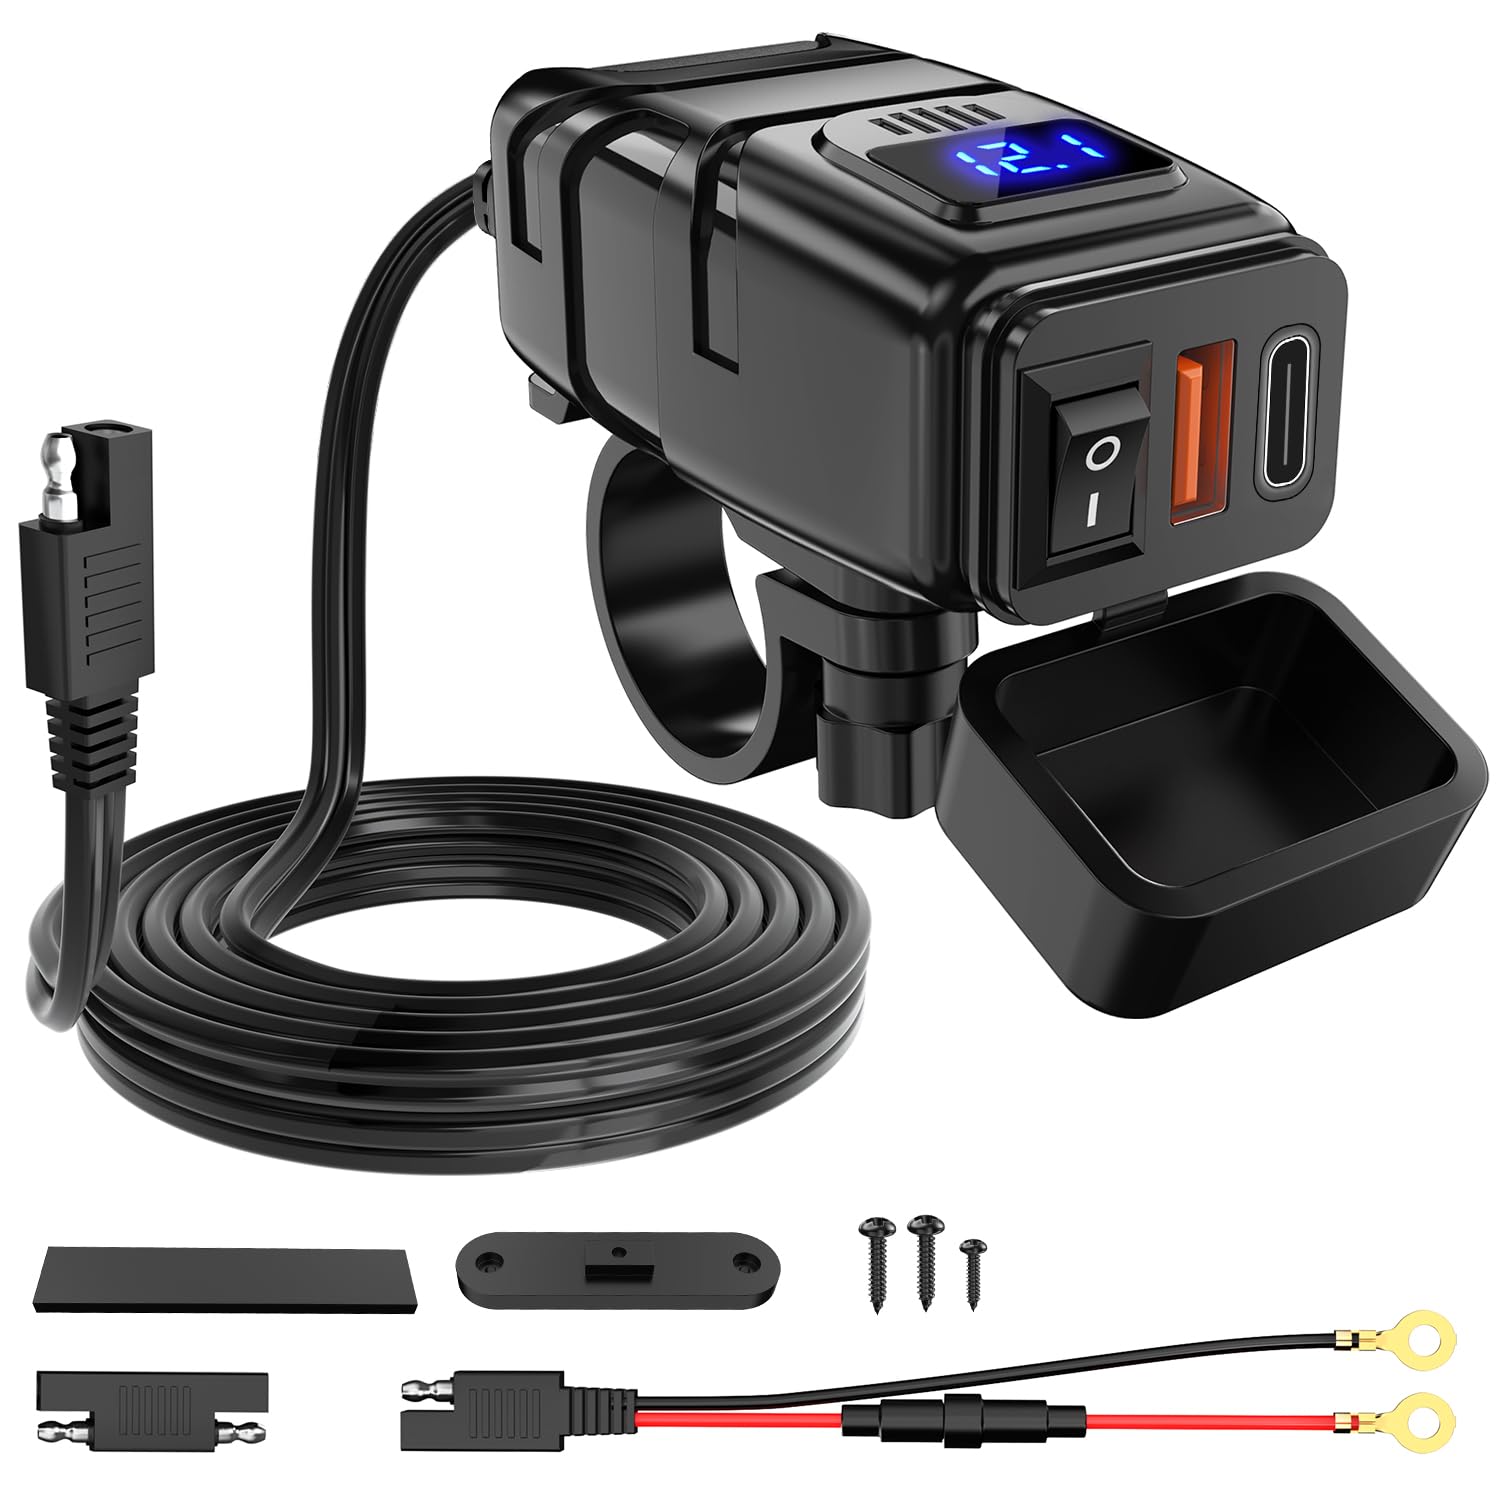 Nilight Motorcycle Charger with USB Type C Port 12V Voltmeter Independent On Off Switch SAE Inline 10A Fuse Waterproof 6.8A QC3.0 Fast Charging Phone Tablet for 7/8inch Handlebar,2 Years Warranty